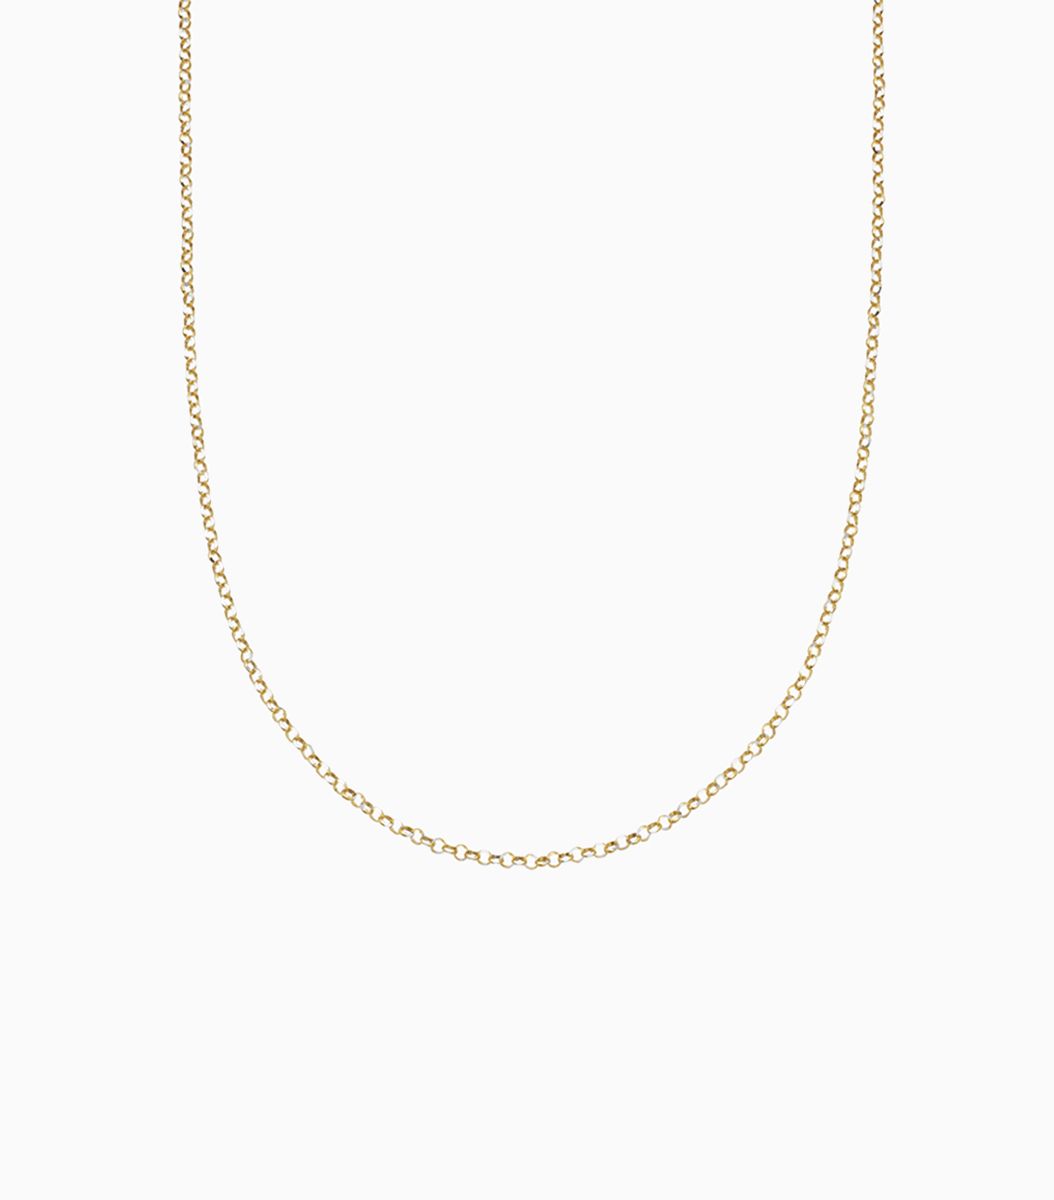 Adjustable Rolo Gold Chain - 20 inch - 14k